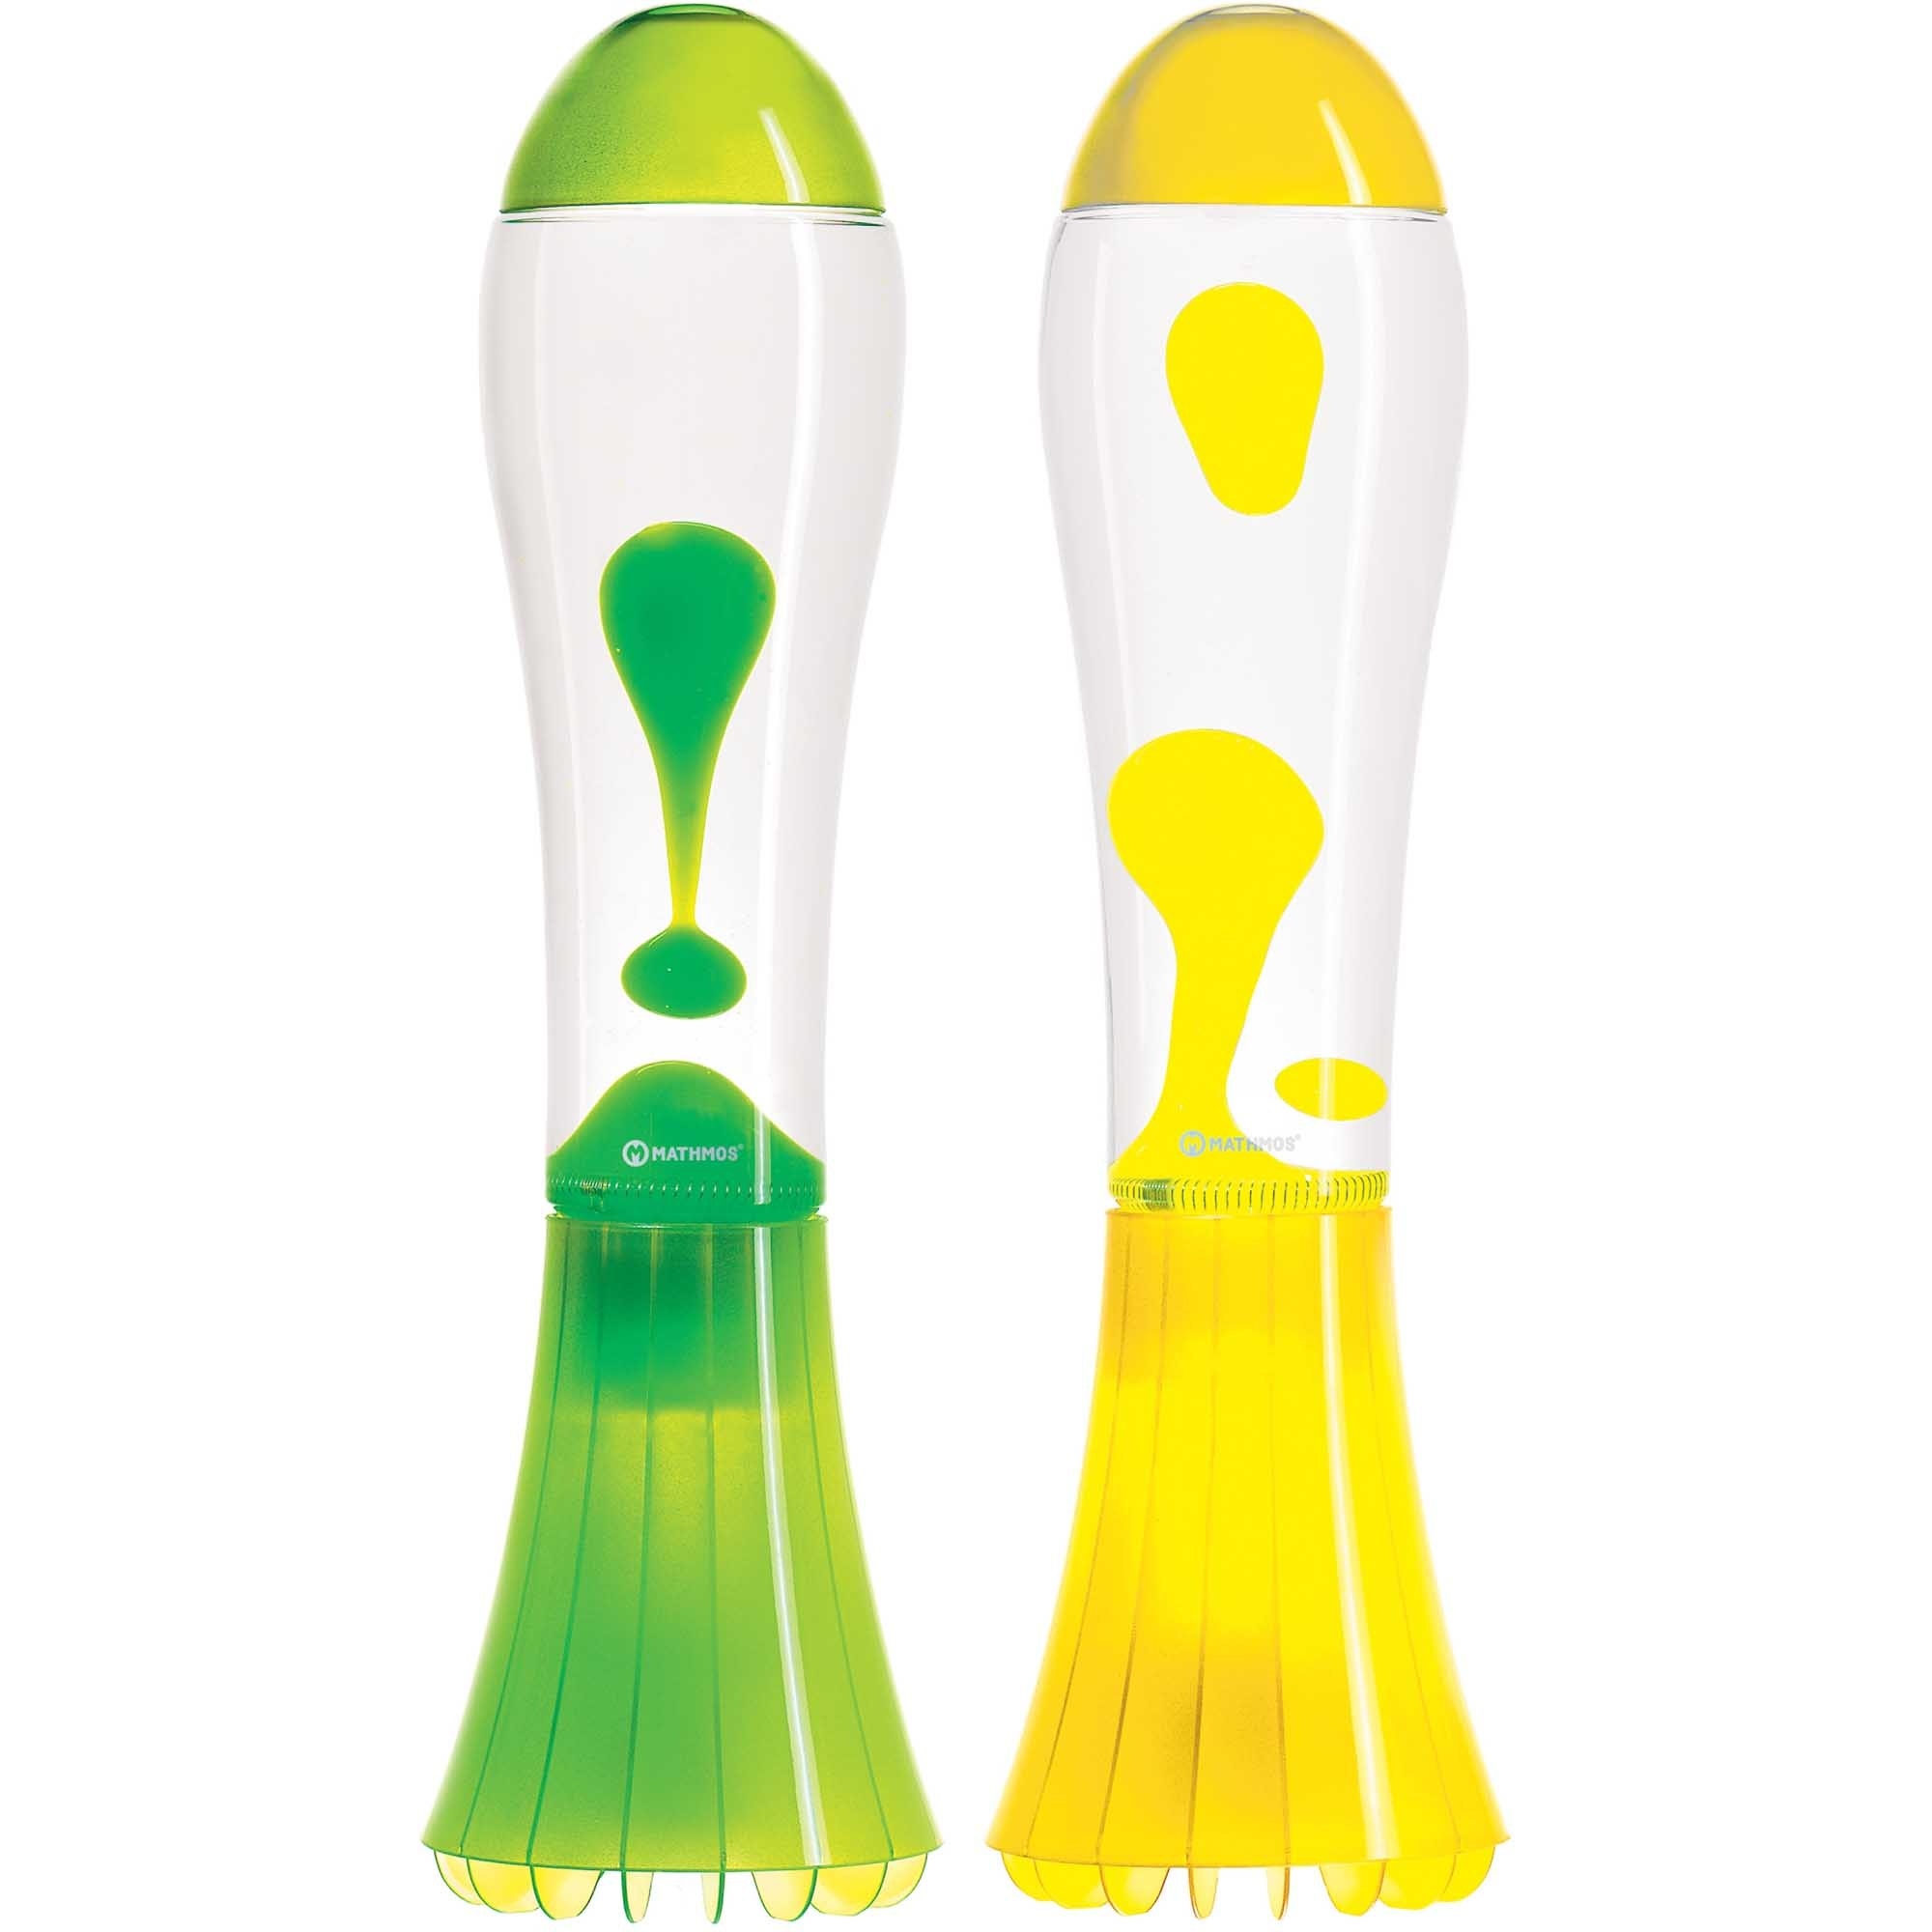 A green and a yellow rocket-style lava lamp